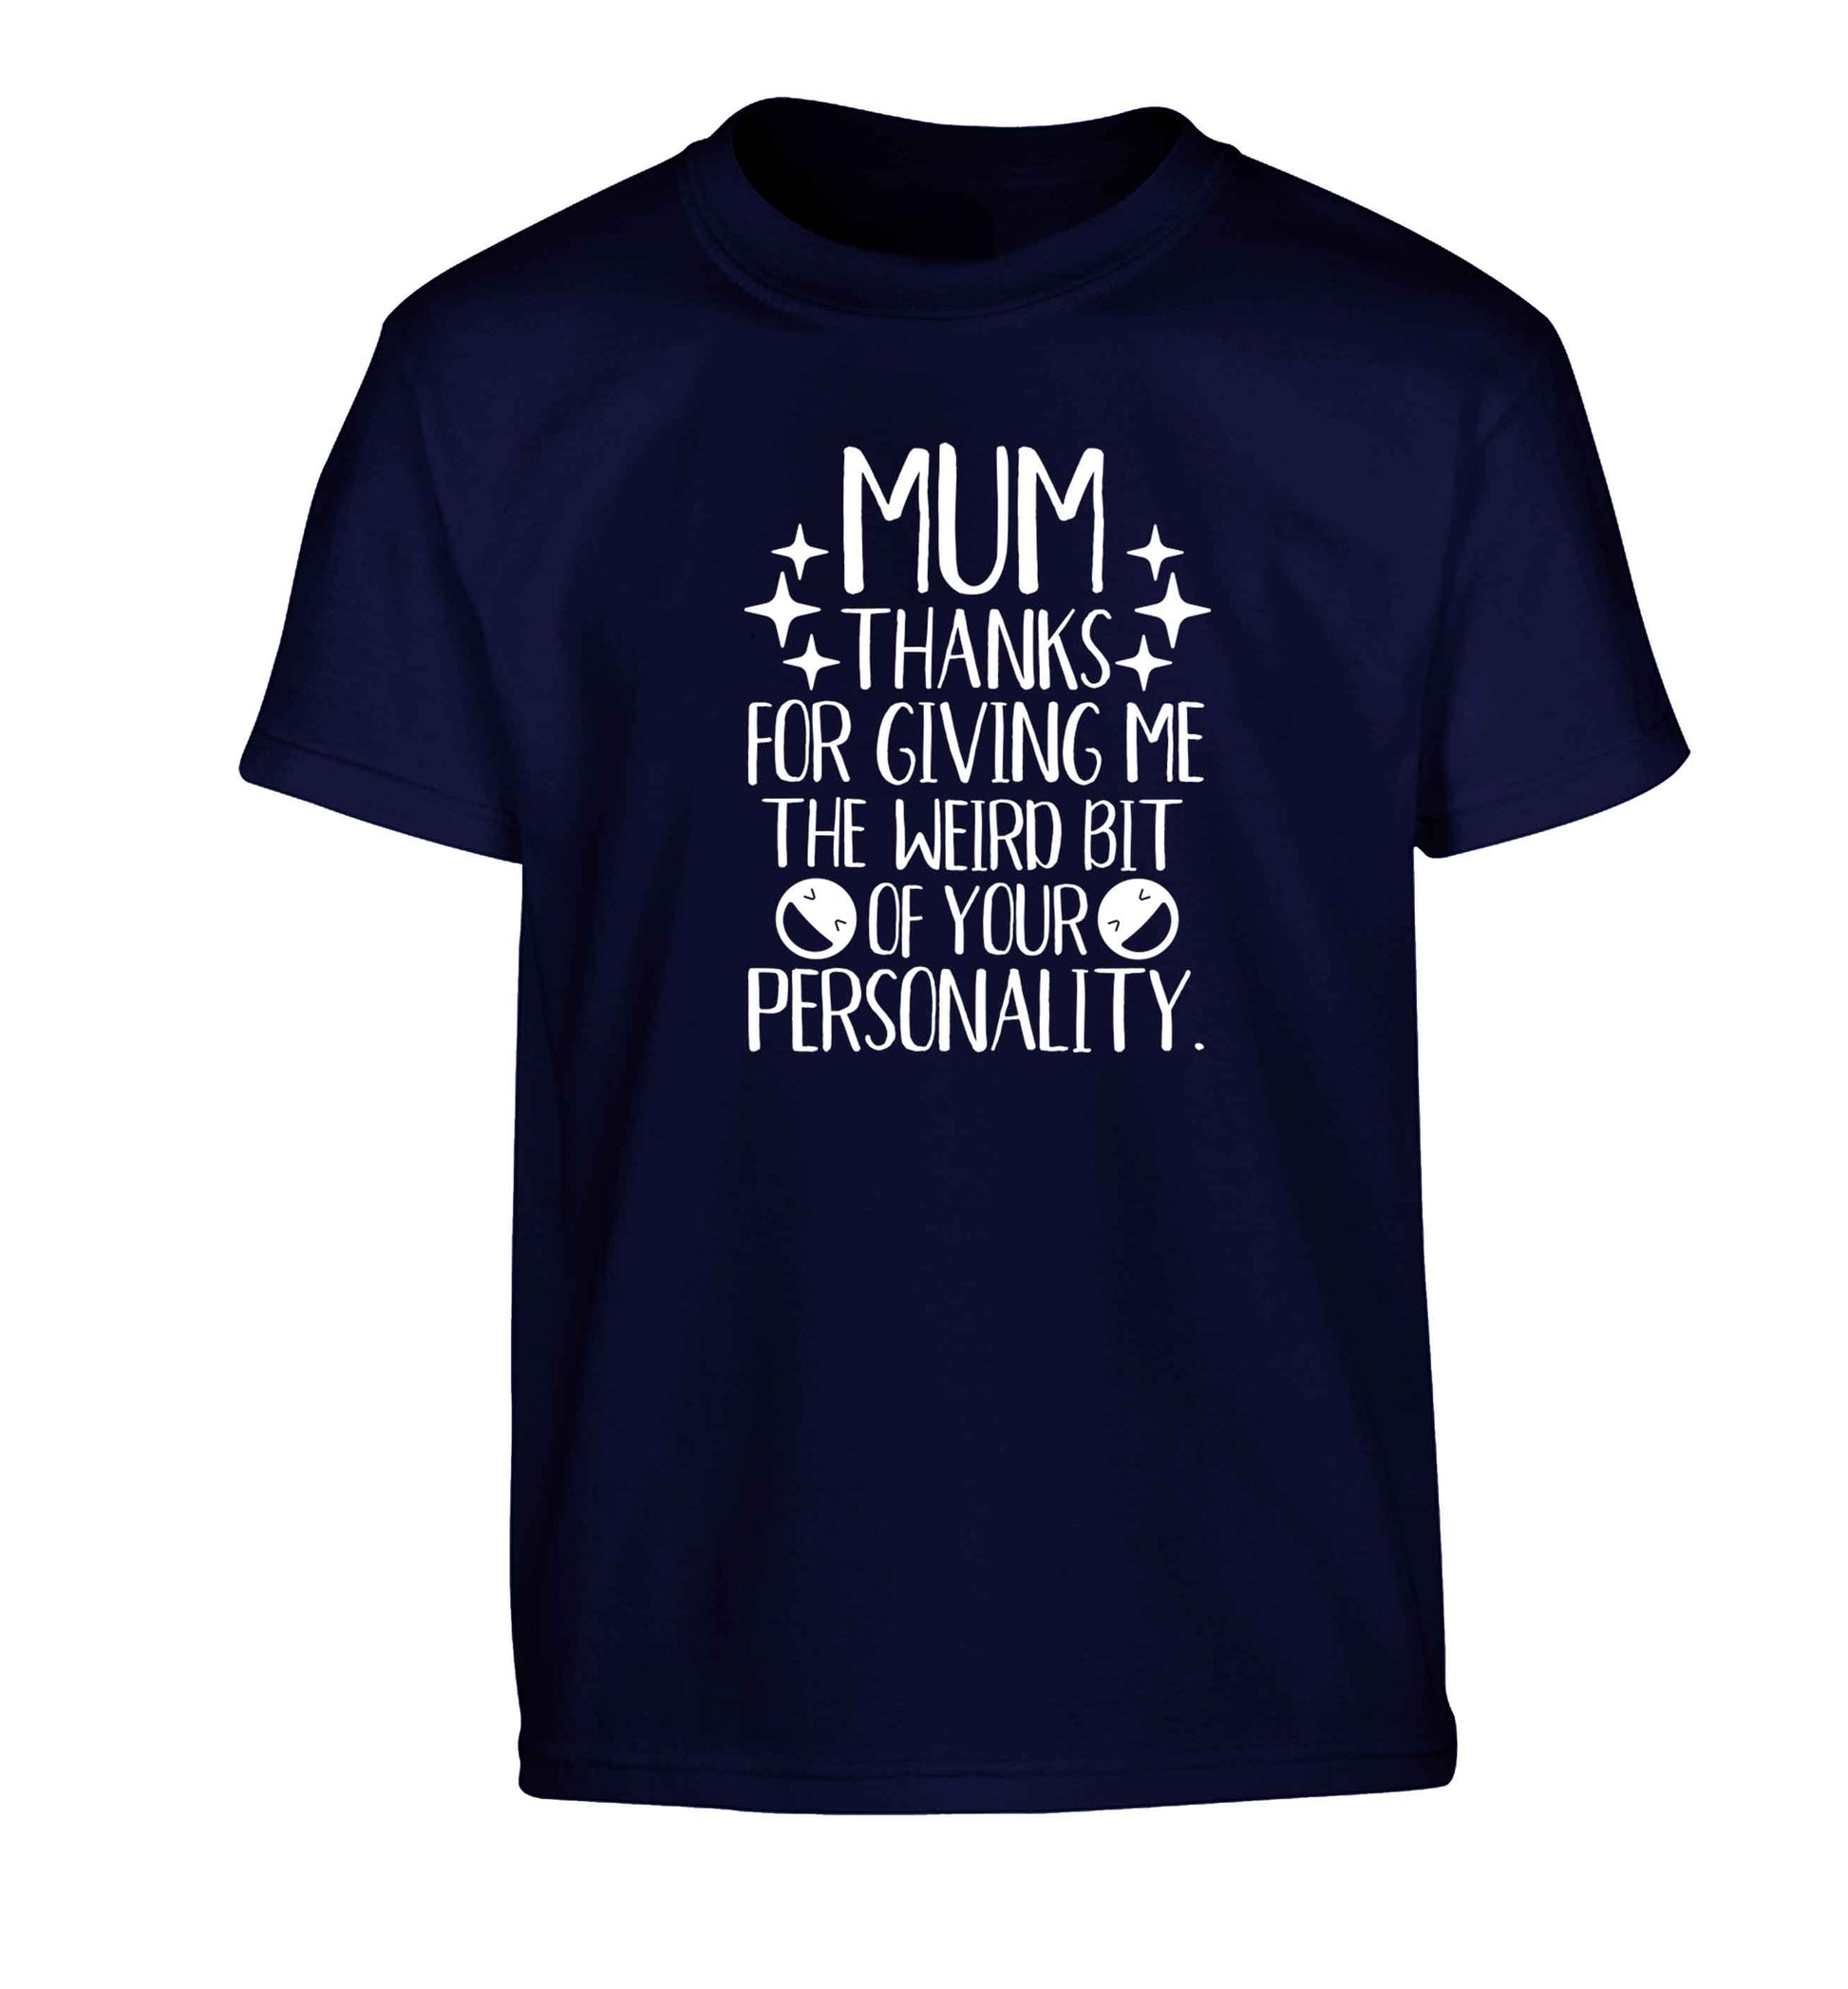 Mum thanks for giving me the weird bit of your personality Children's navy Tshirt 12-13 Years